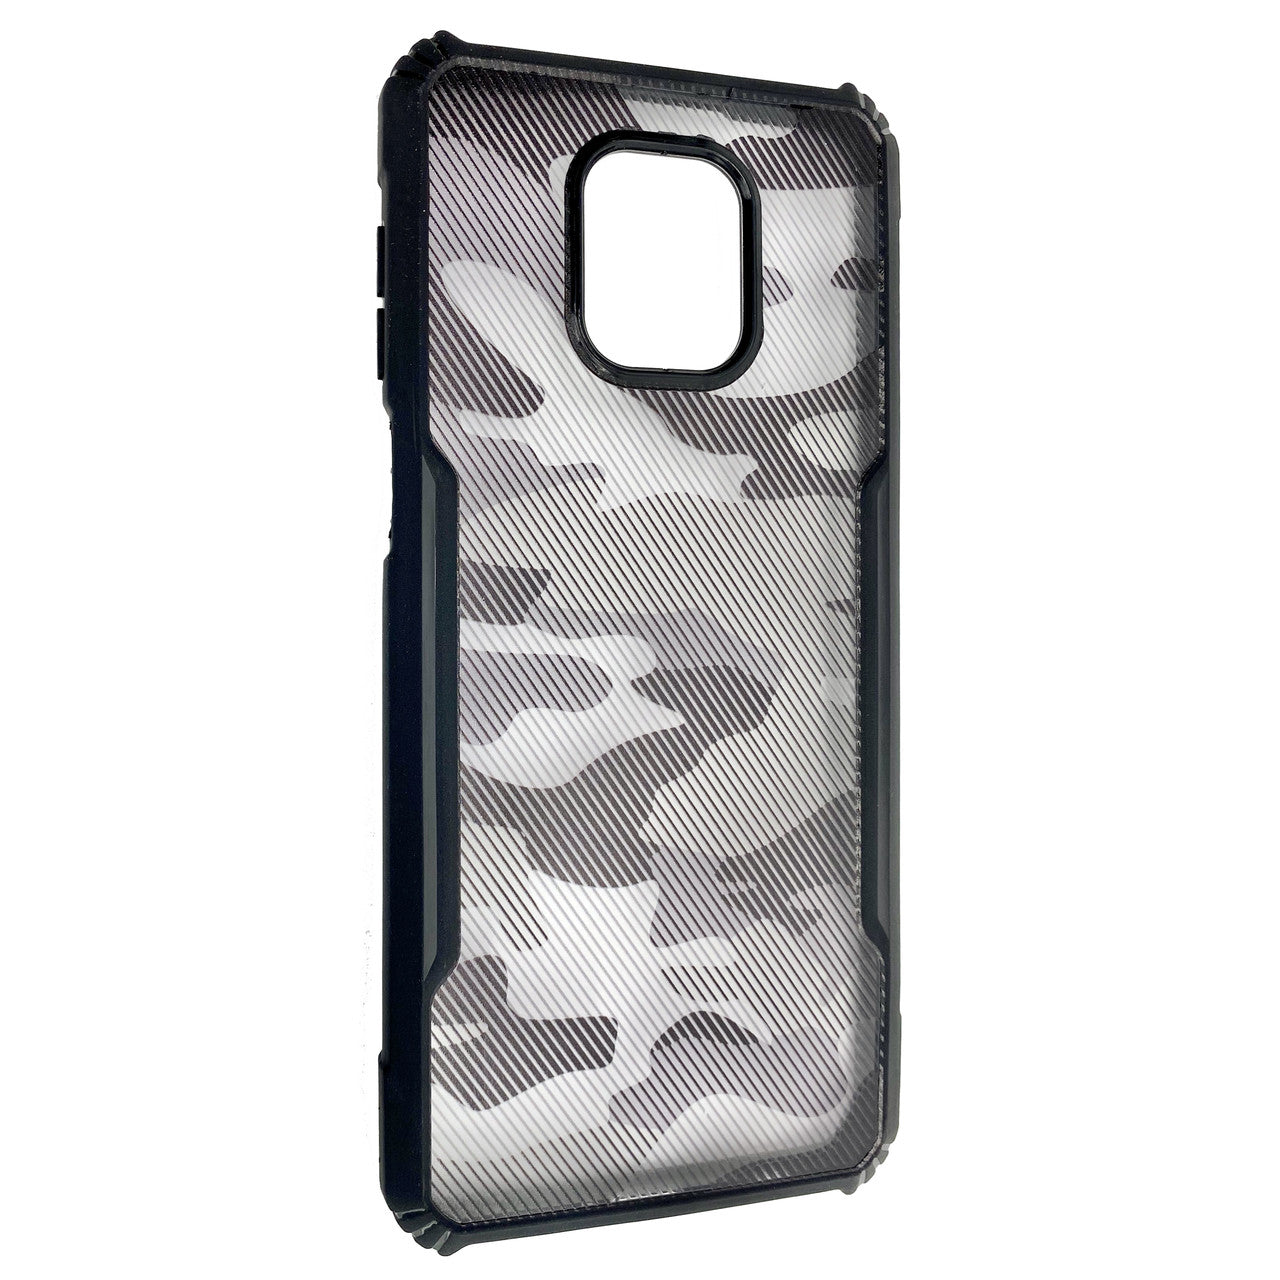 RZANTS Beetle Camouflage Hybrid Fusion Armor For Iphone